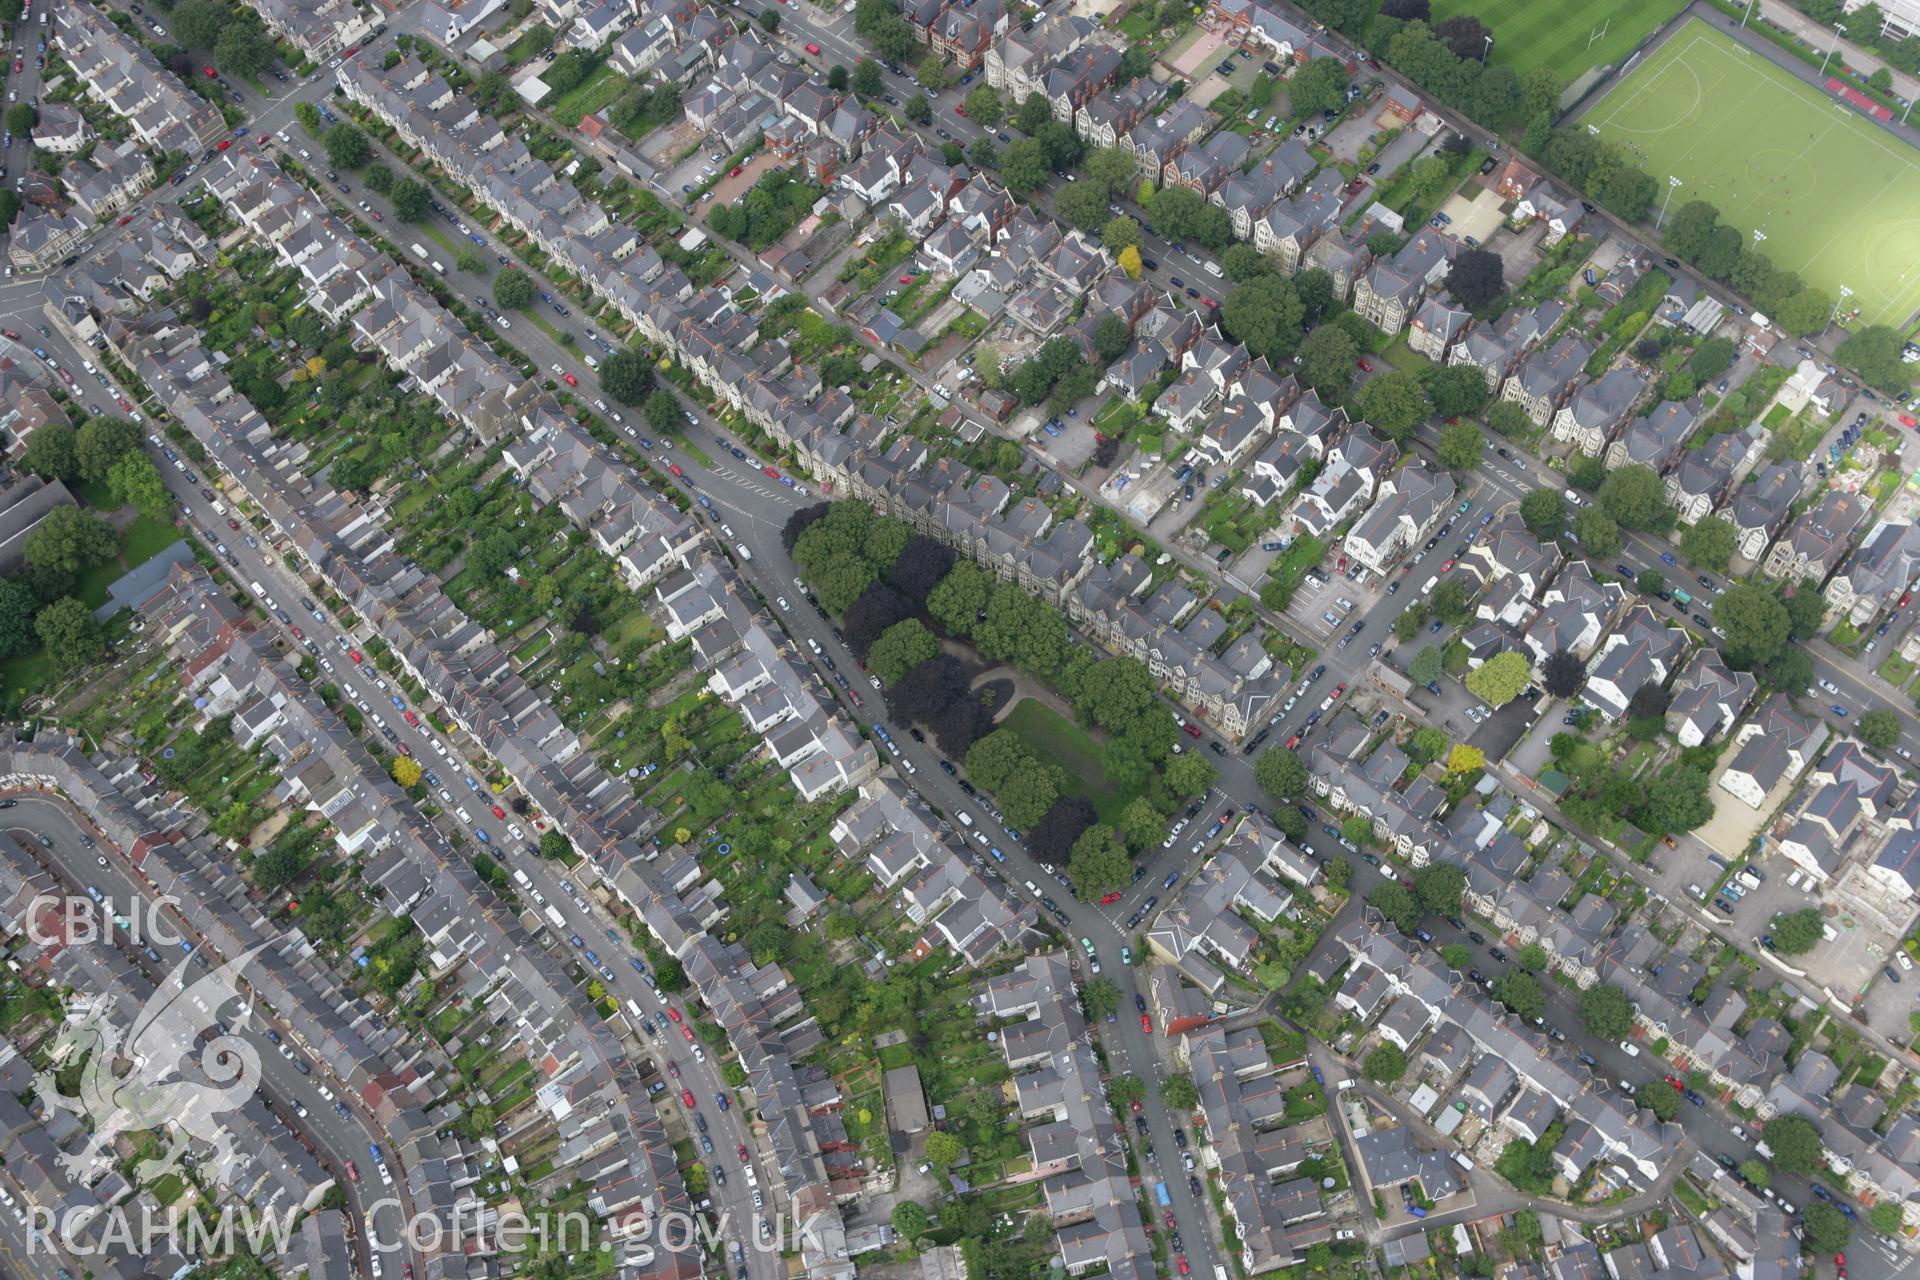 RCAHMW colour oblique aerial photograph of Cardiff including Pontcanna. Taken on 30 July 2007 by Toby Driver